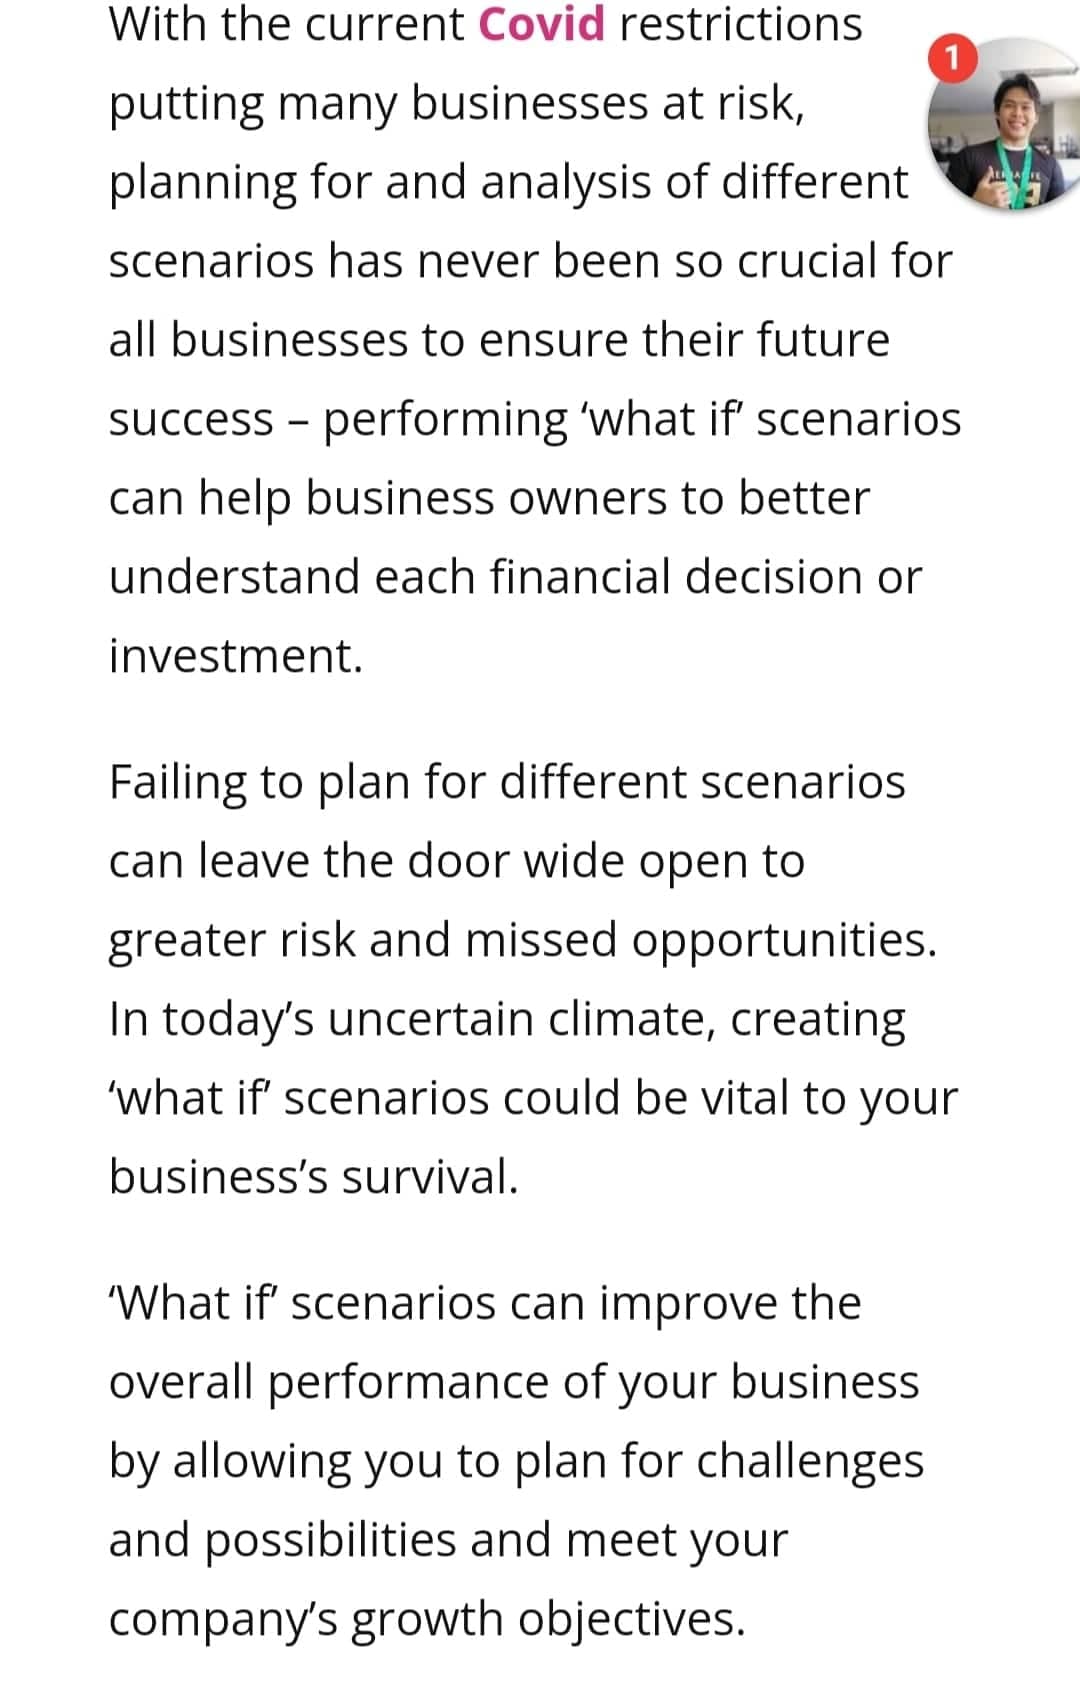 With the current Covid restrictions
1
putting many businesses at risk,
planning for and analysis of different
ALAE
scenarios has never been so crucial for
all businesses to ensure their future
success - performing 'what if scenarios
can help business owners to better
understand each financial decision or
investment.
Failing to plan for different scenarios
can leave the door wide open to
greater risk and missed opportunities.
In today's uncertain climate, creating
'what if' scenarios could be vital to your
business's survival.
'What if' scenarios can improve the
overall performance of your business
by allowing you to plan for challenges
and possibilities and meet your
company's growth objectives.
